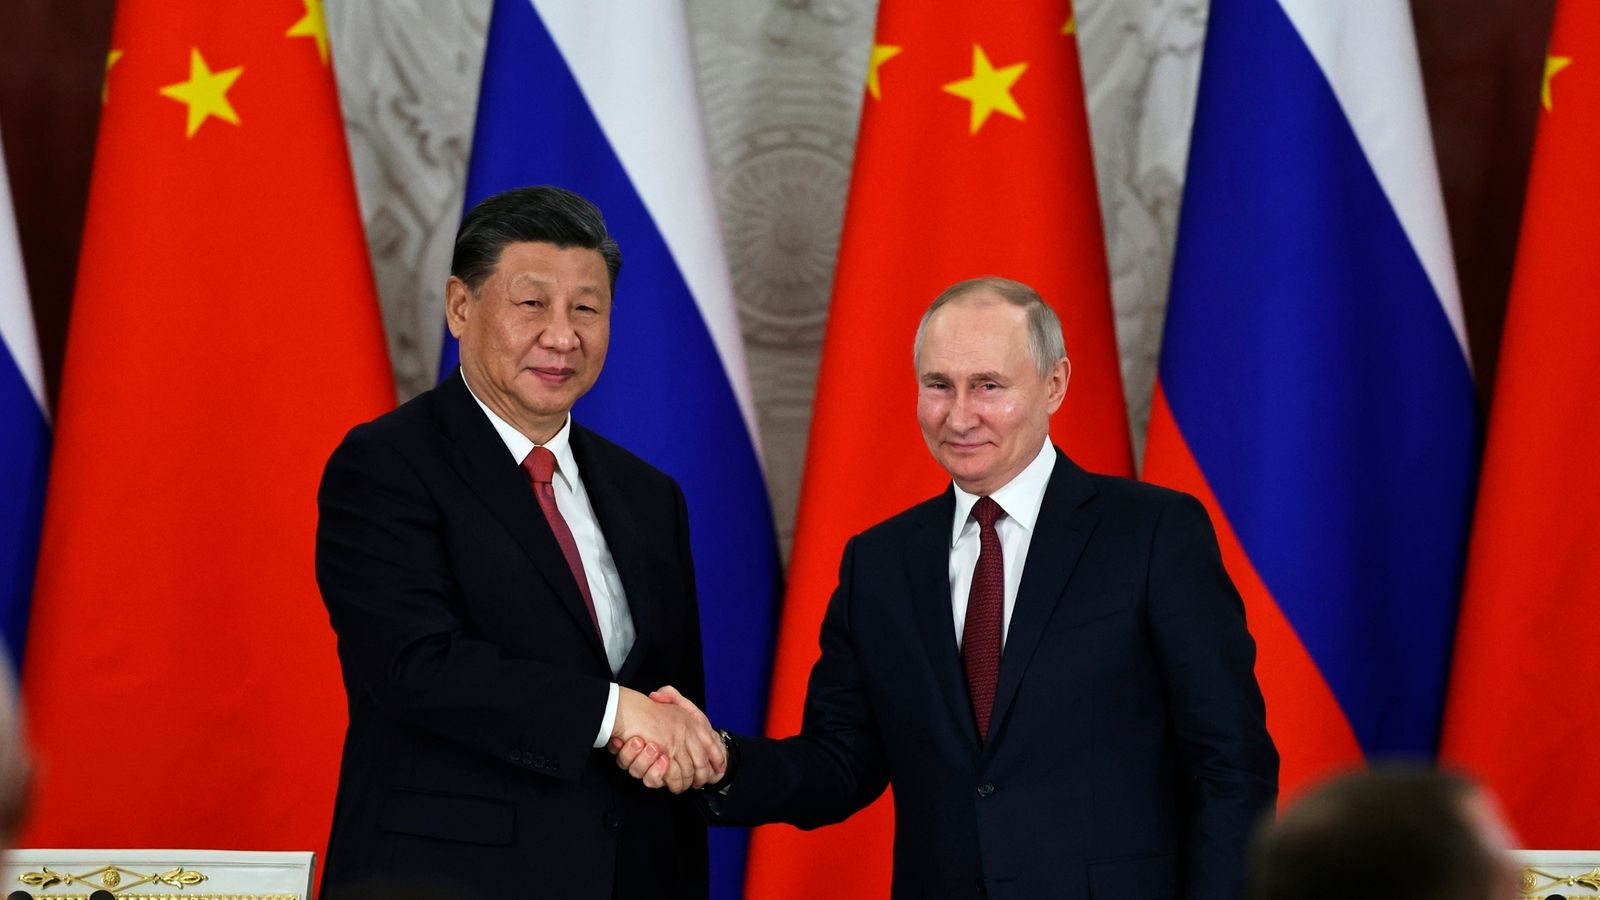 Vladimir Putin's visits China's leader Xi shows where his priorities lie - but one is clearly stronger than the other